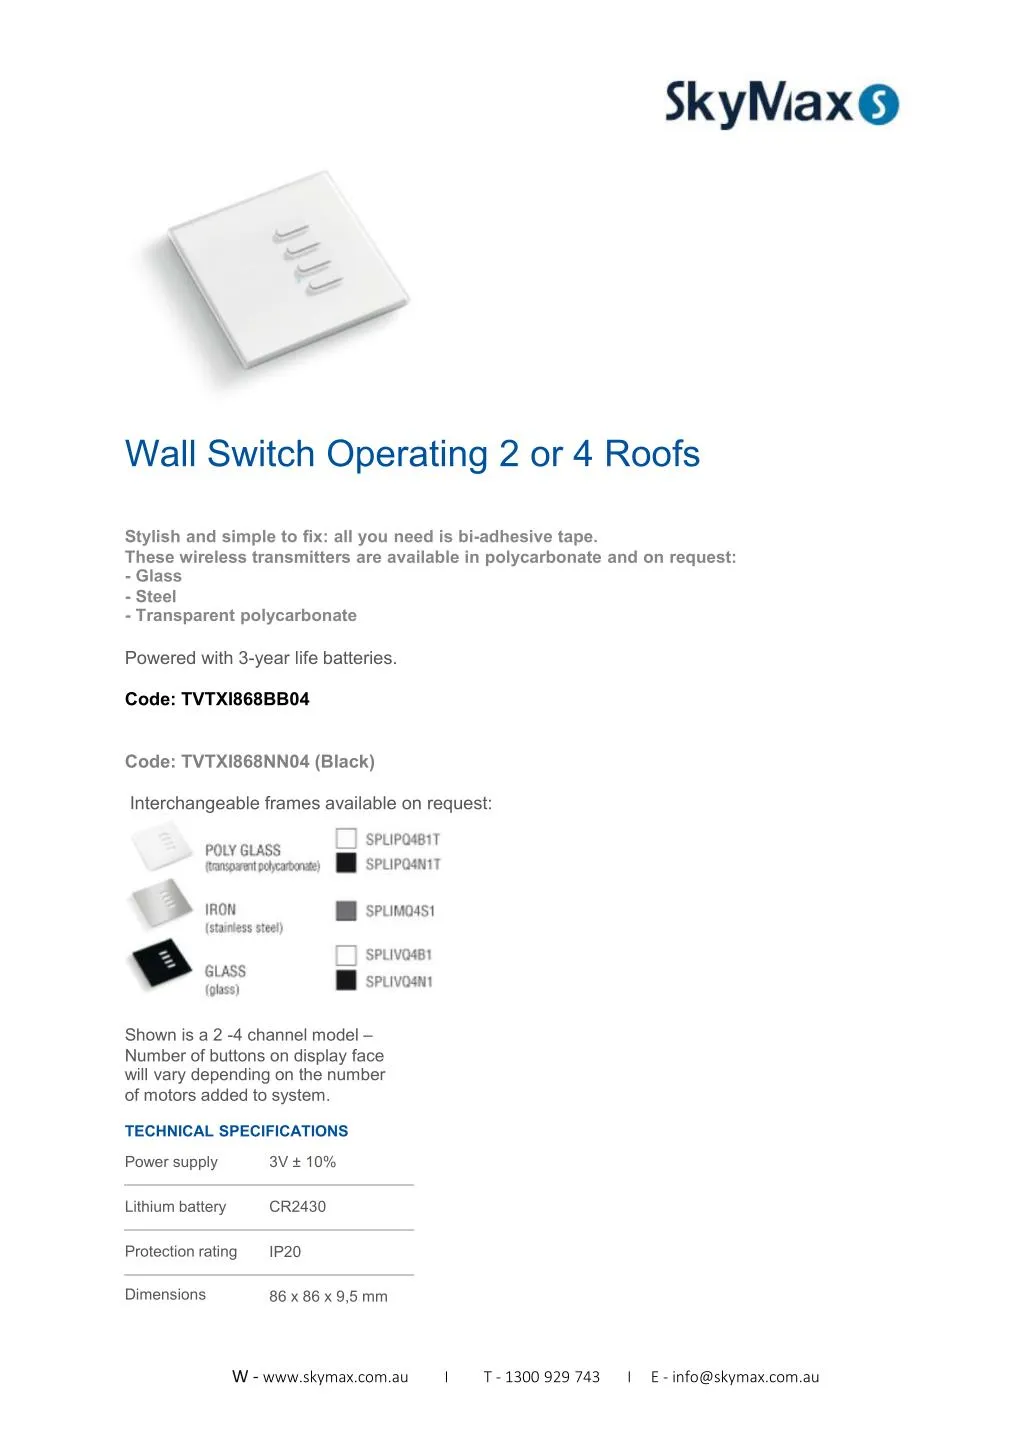 wall switch operating 2 or 4 roofs